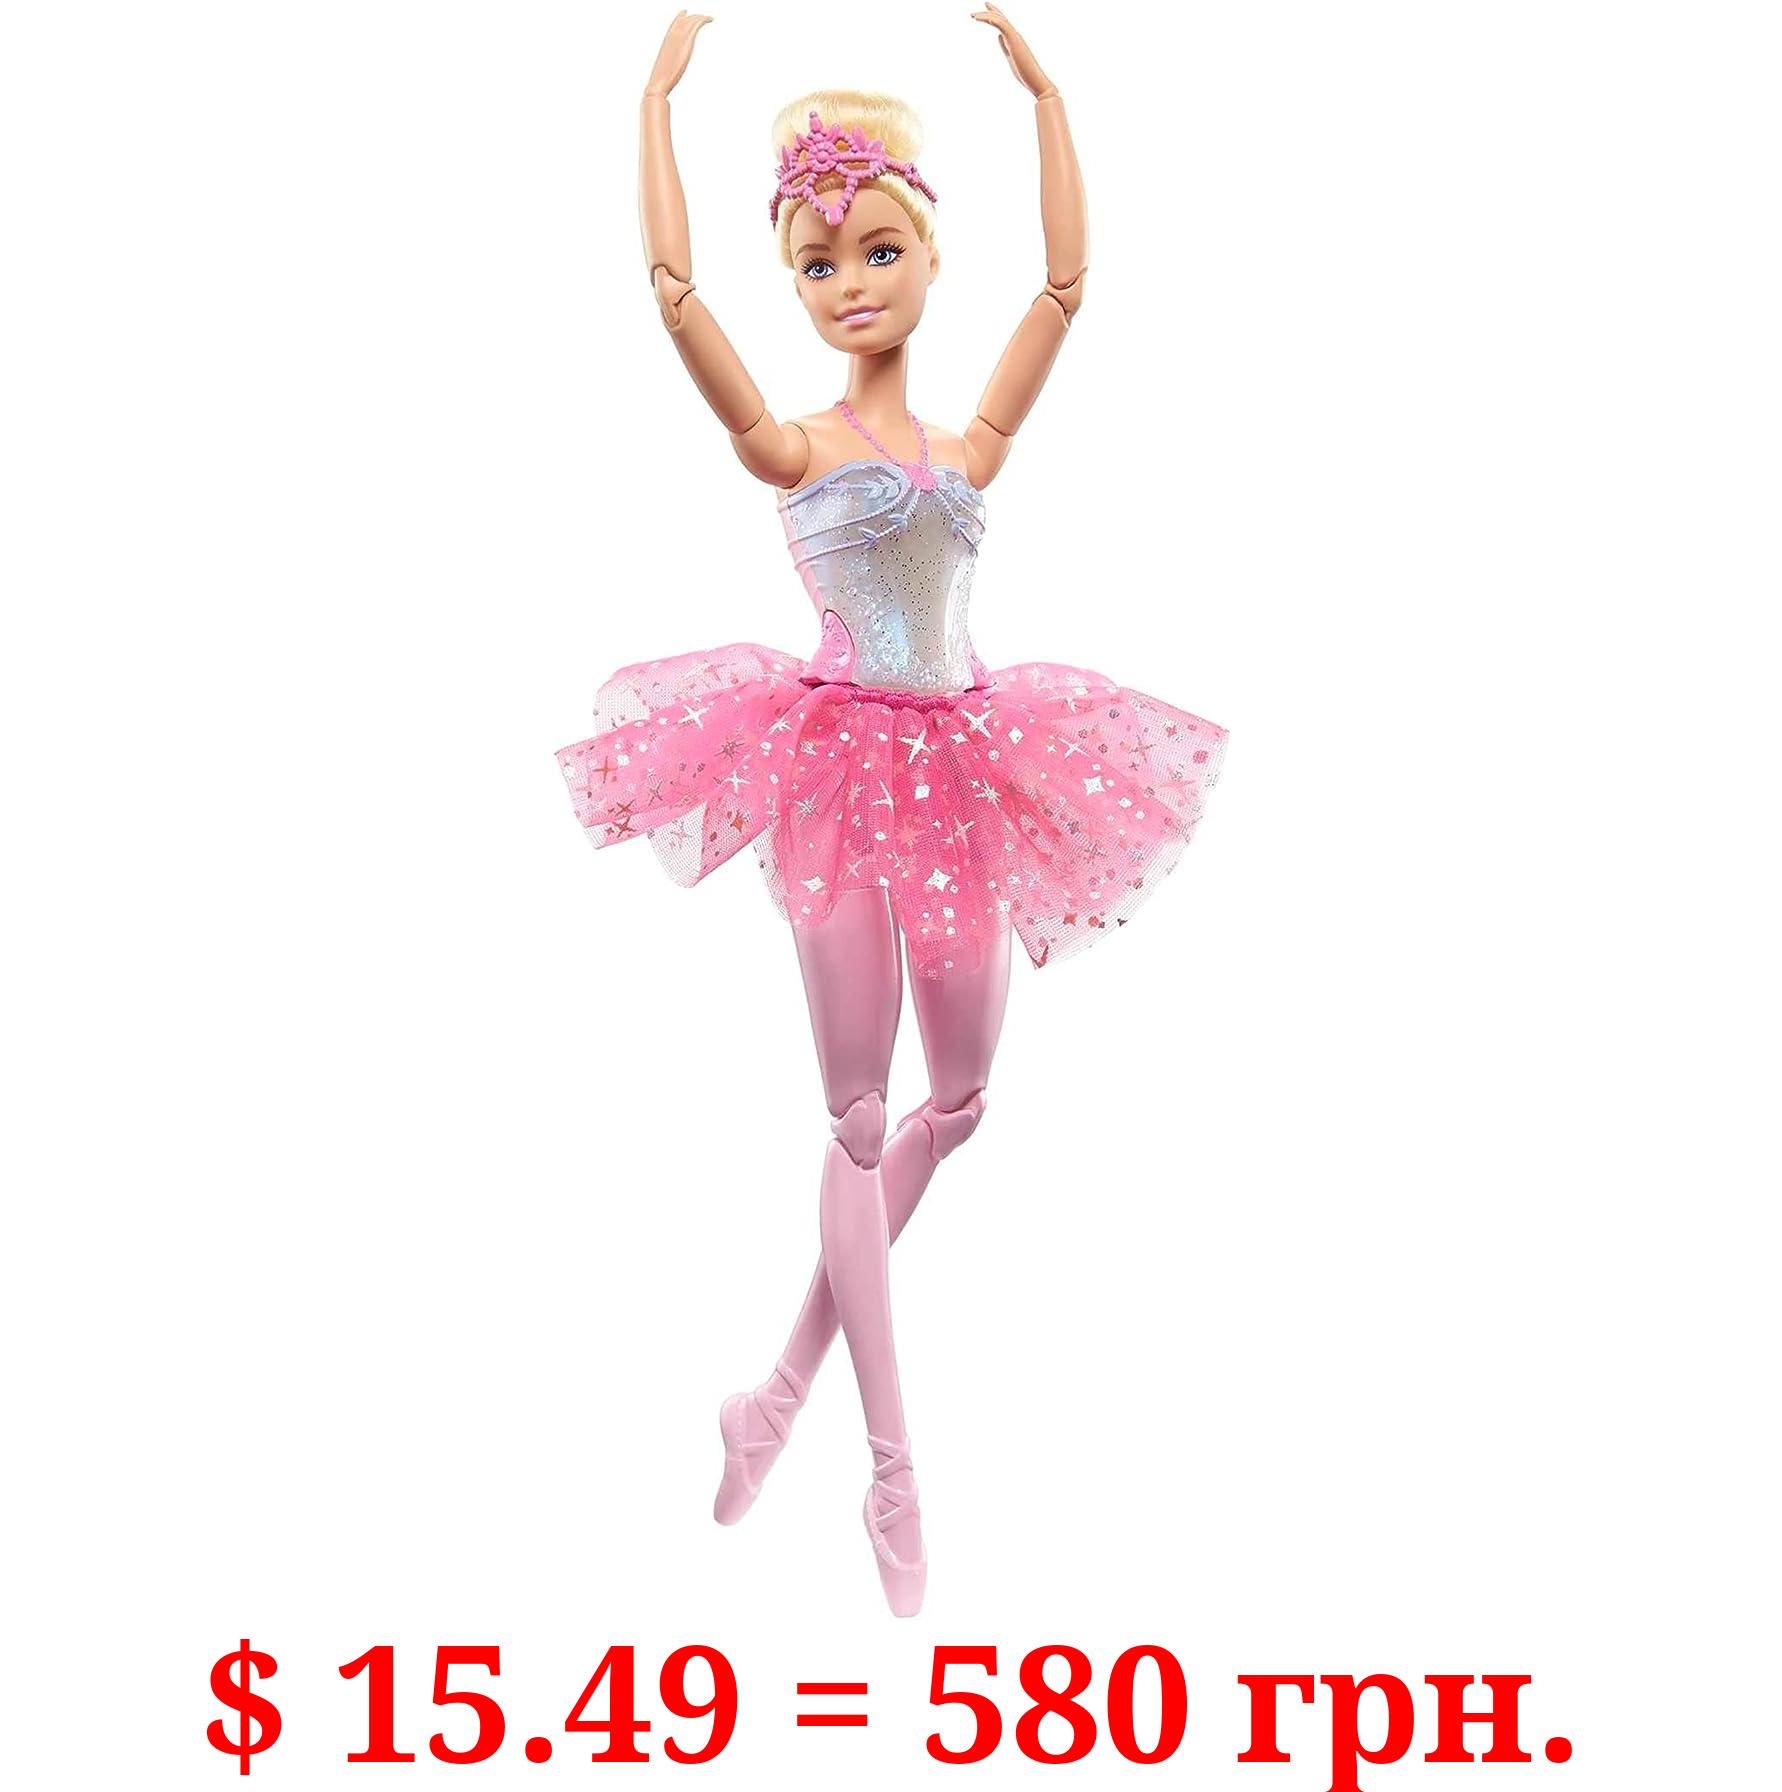 Barbie Dreamtopia Doll, Twinkle Lights Posable Ballerina with 5 Light-Up Shows, Sparkly Pink Tutu, Blonde Hair & Tiara